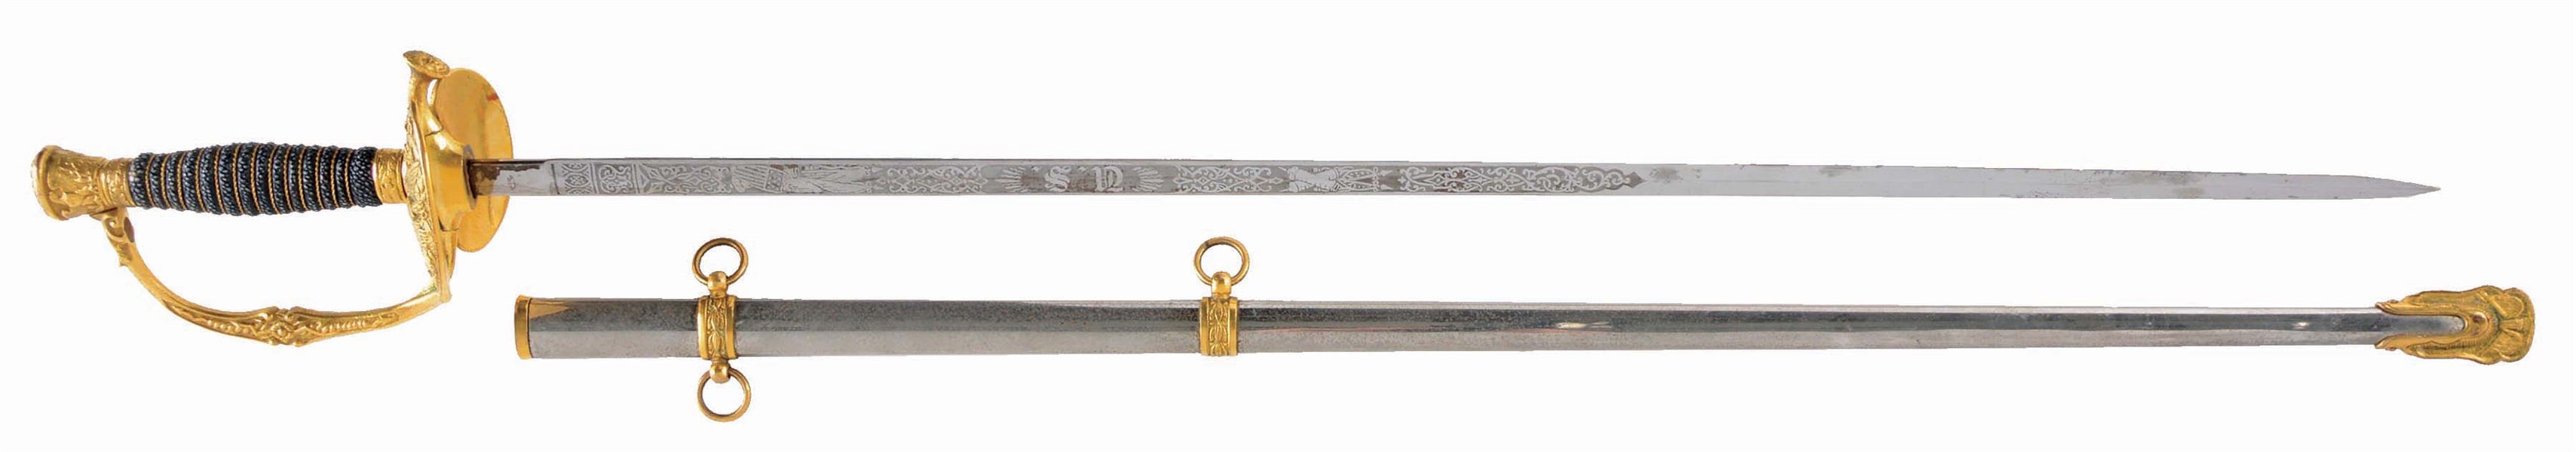 POST CIVIL WAR STAFF AND FIELD U.S. OFFICERS SWORD BY M.C. LILLEY IN VIRTUALLY PRISTINE CONDITION.